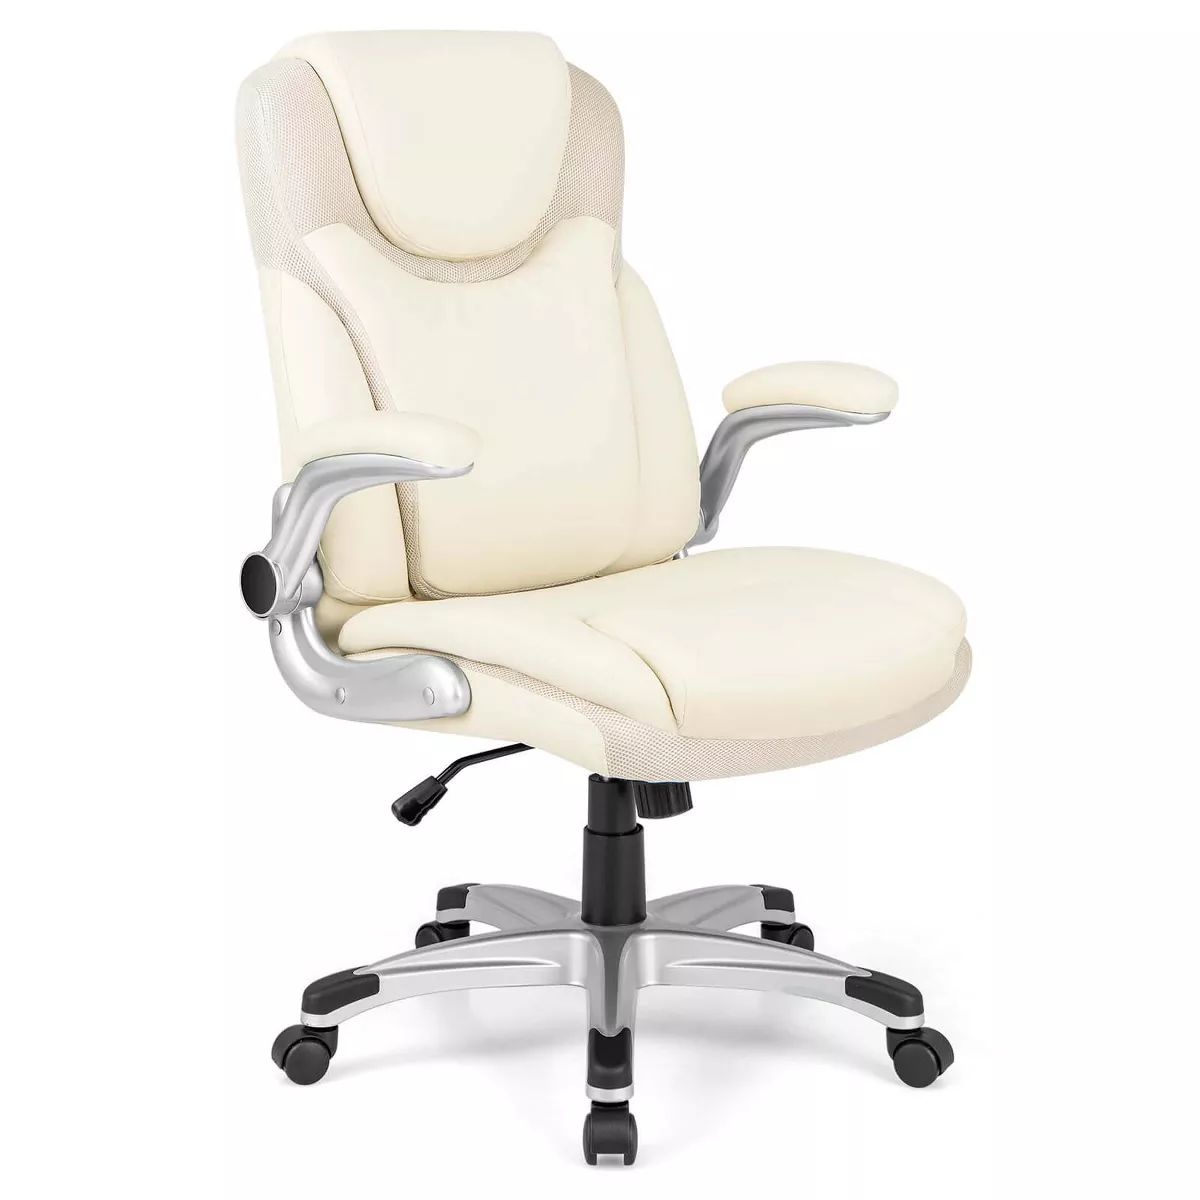 Costway Ergonomic Office Chair PU Leather Executive Swivel with Flip-up Armrests Beige | Target